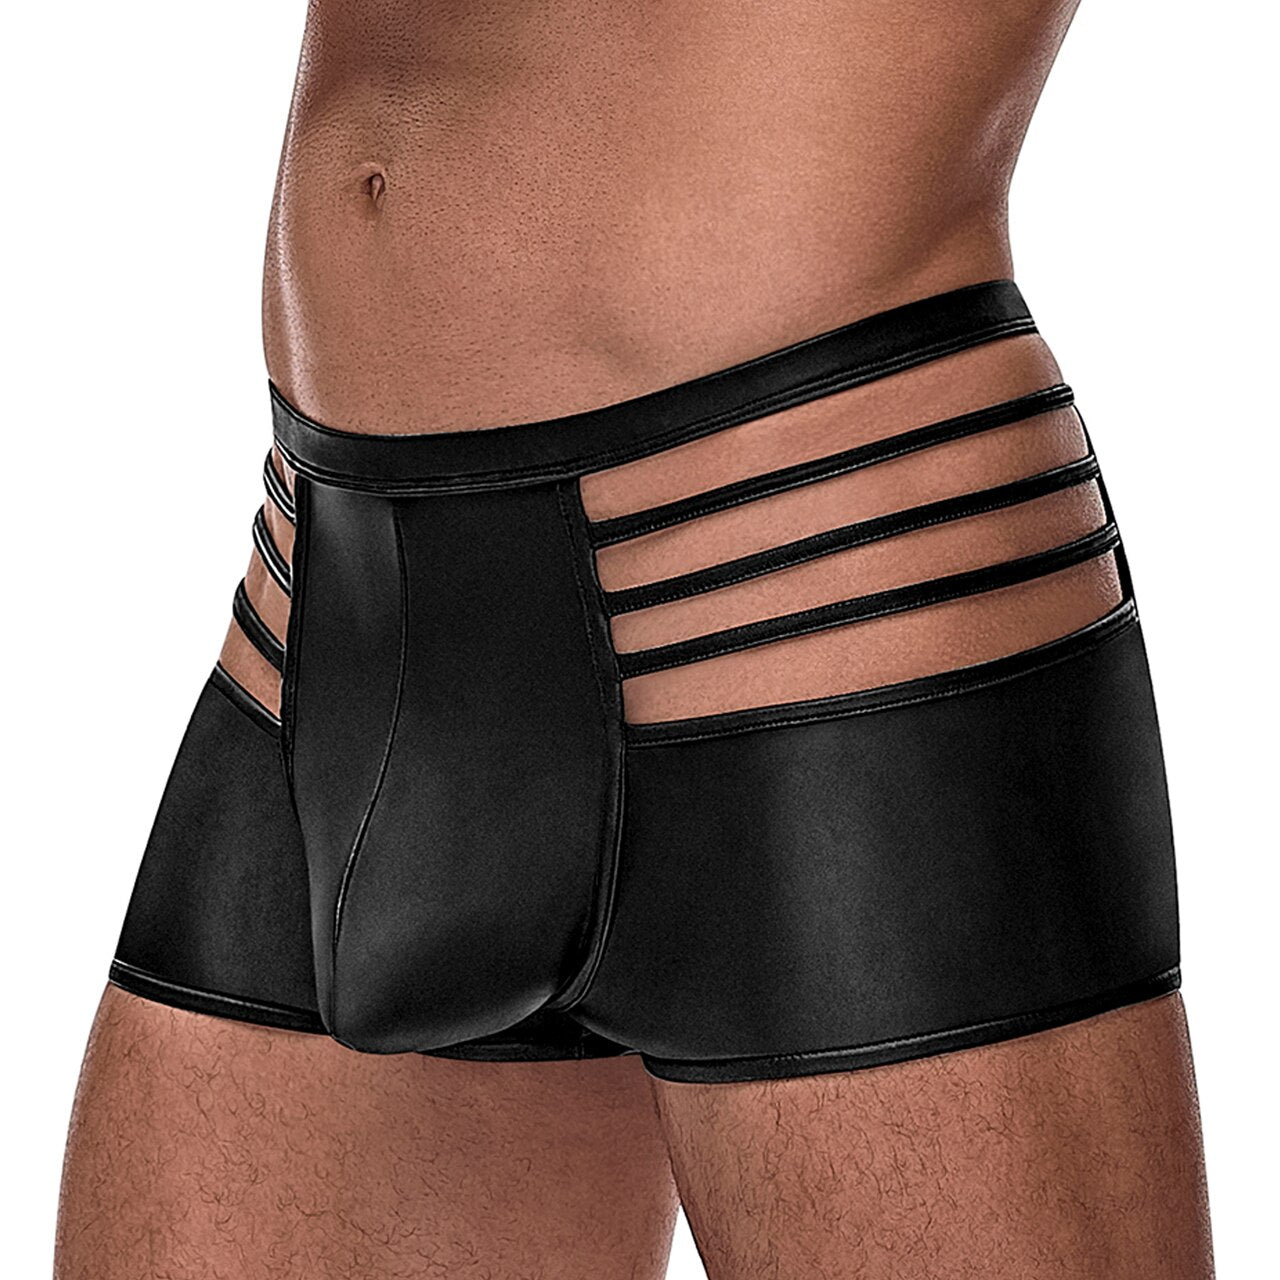 Mens Male Power Matt Wetlook Shorts with Strapped Cutouts Black